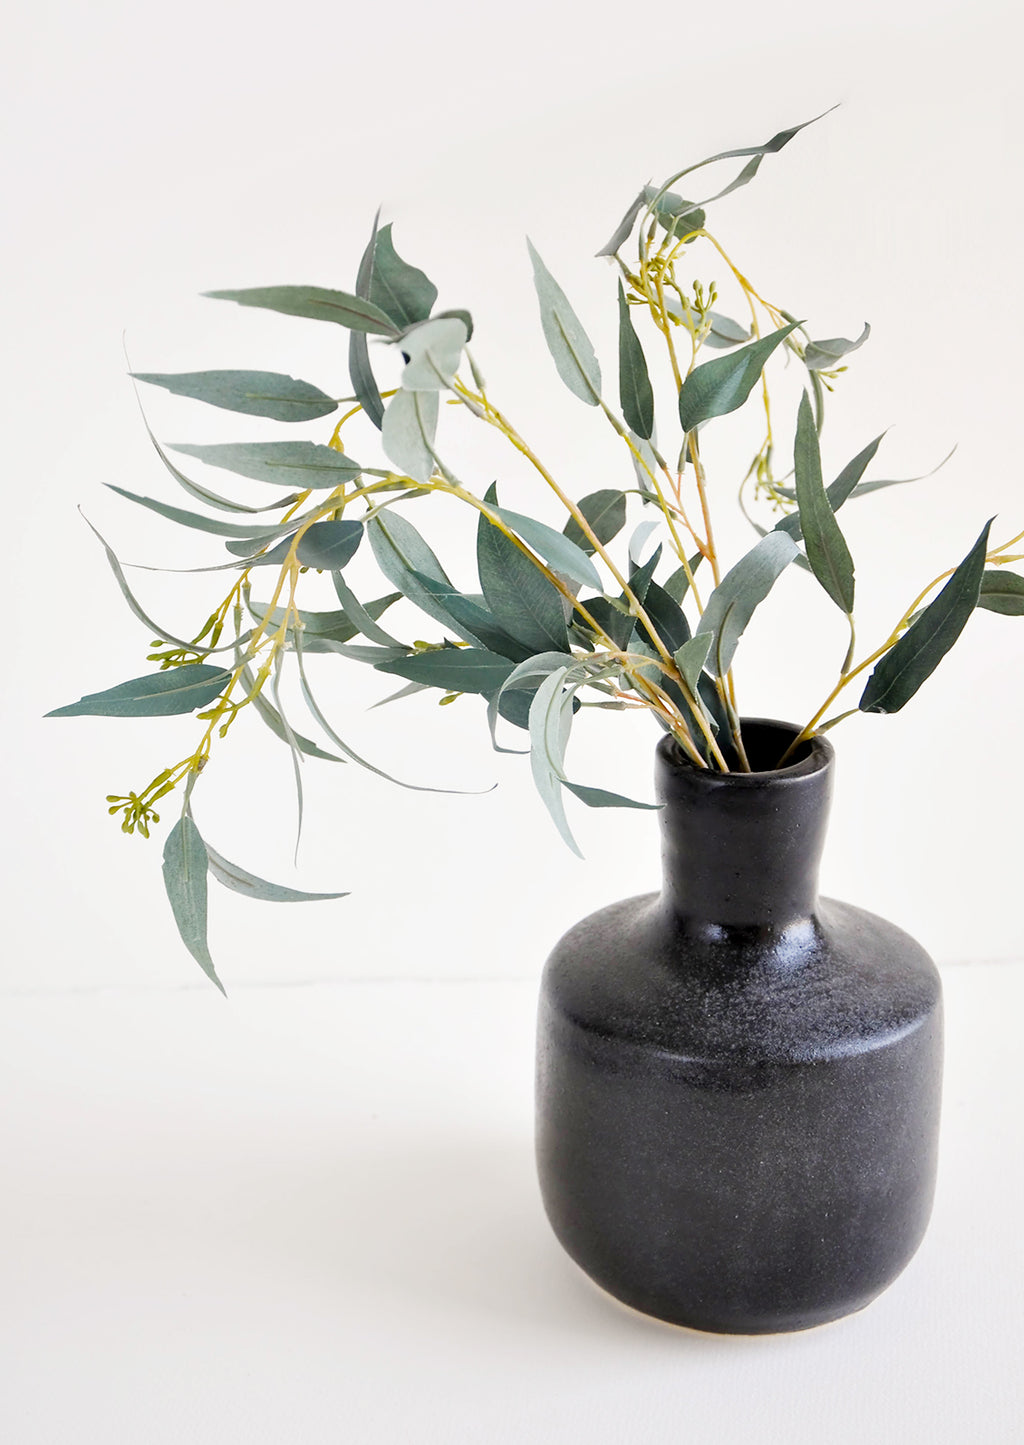 2: Glossy black ceramic vase with wide base and narrow opening, displayed with eucalyptus branch